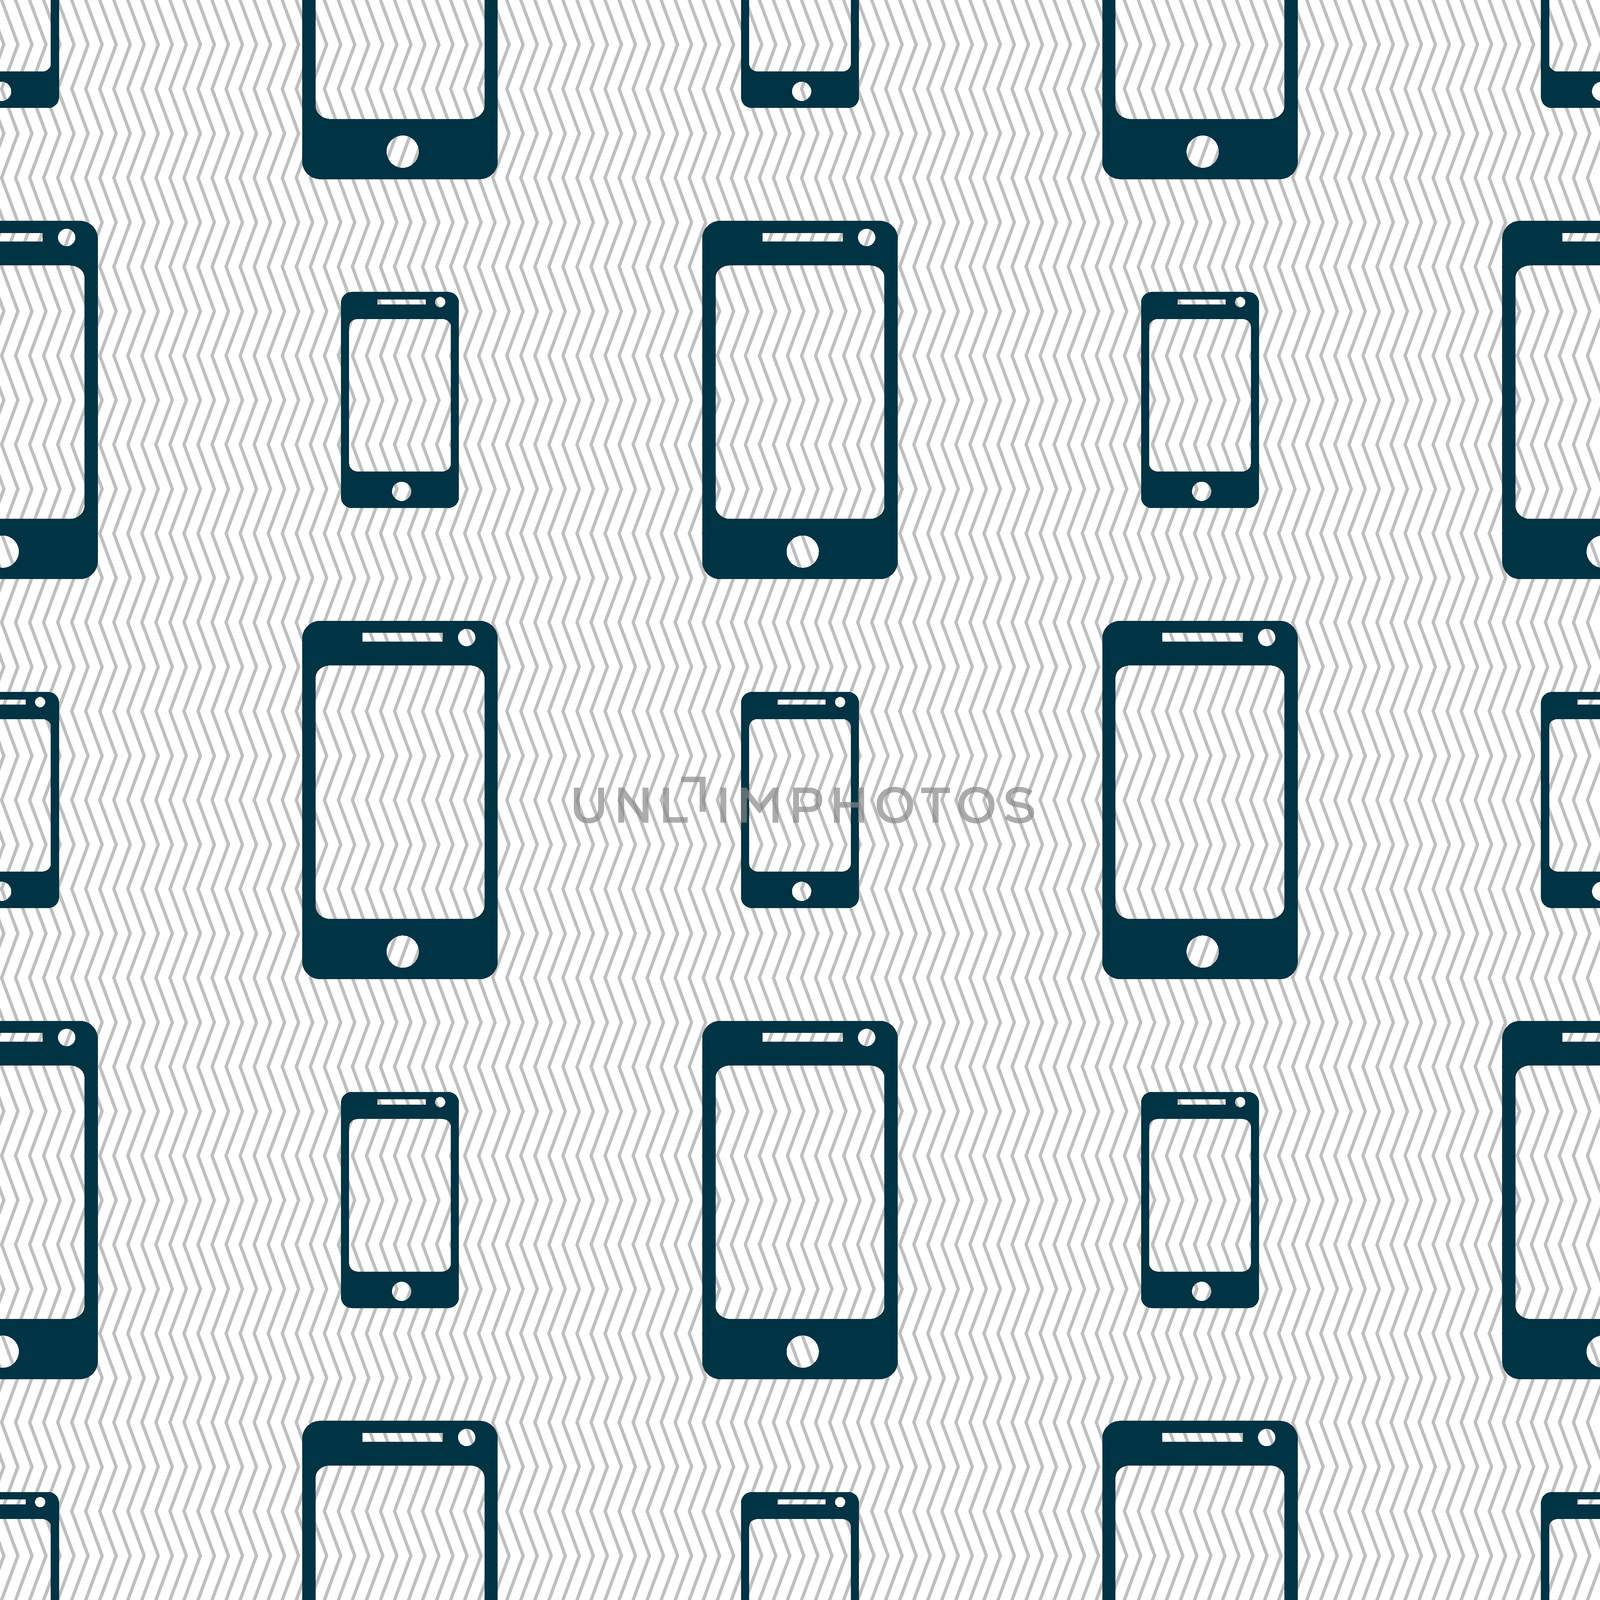 Smartphone sign icon. Support symbol. Call center. Seamless abstract background with geometric shapes. illustration